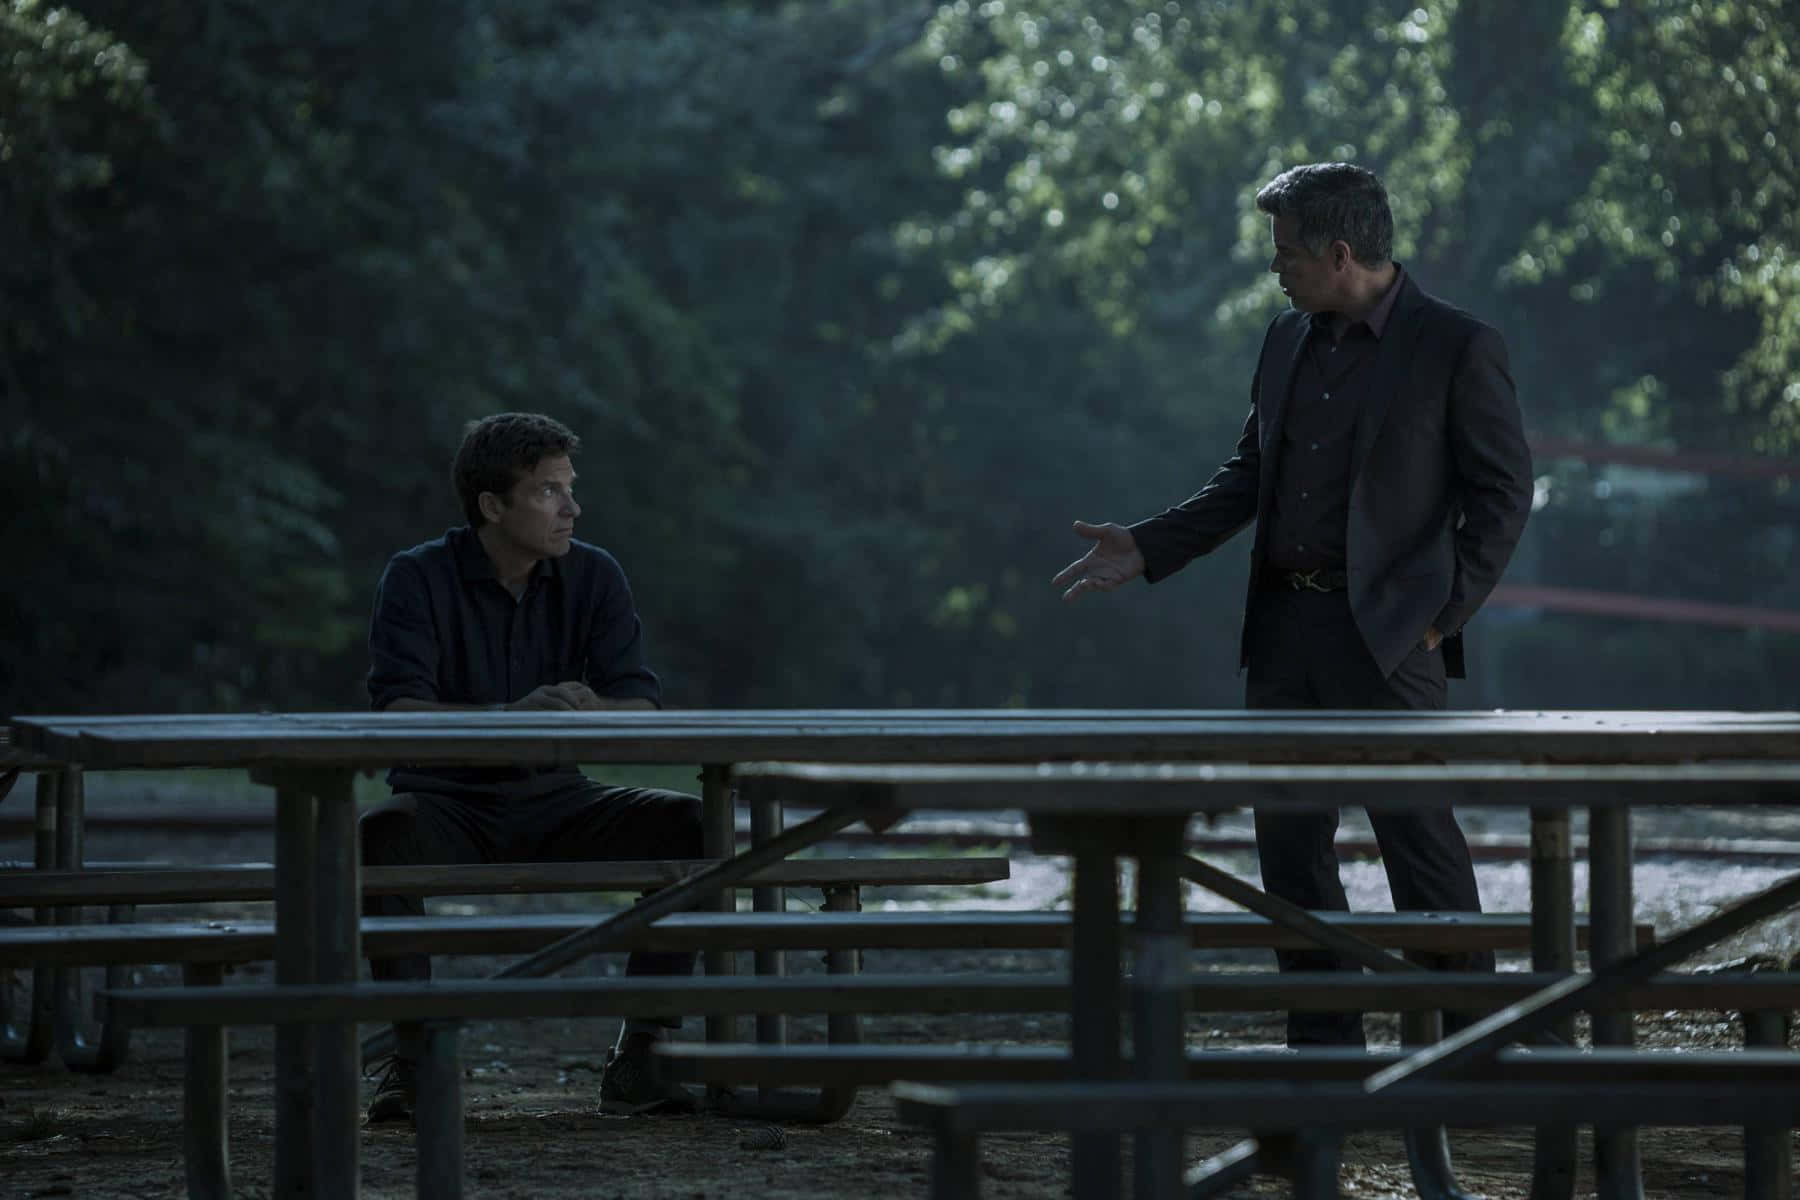 A Dramatic Scene From The Tv Show Ozark With The Main Characters In Intense Discussion. Wallpaper